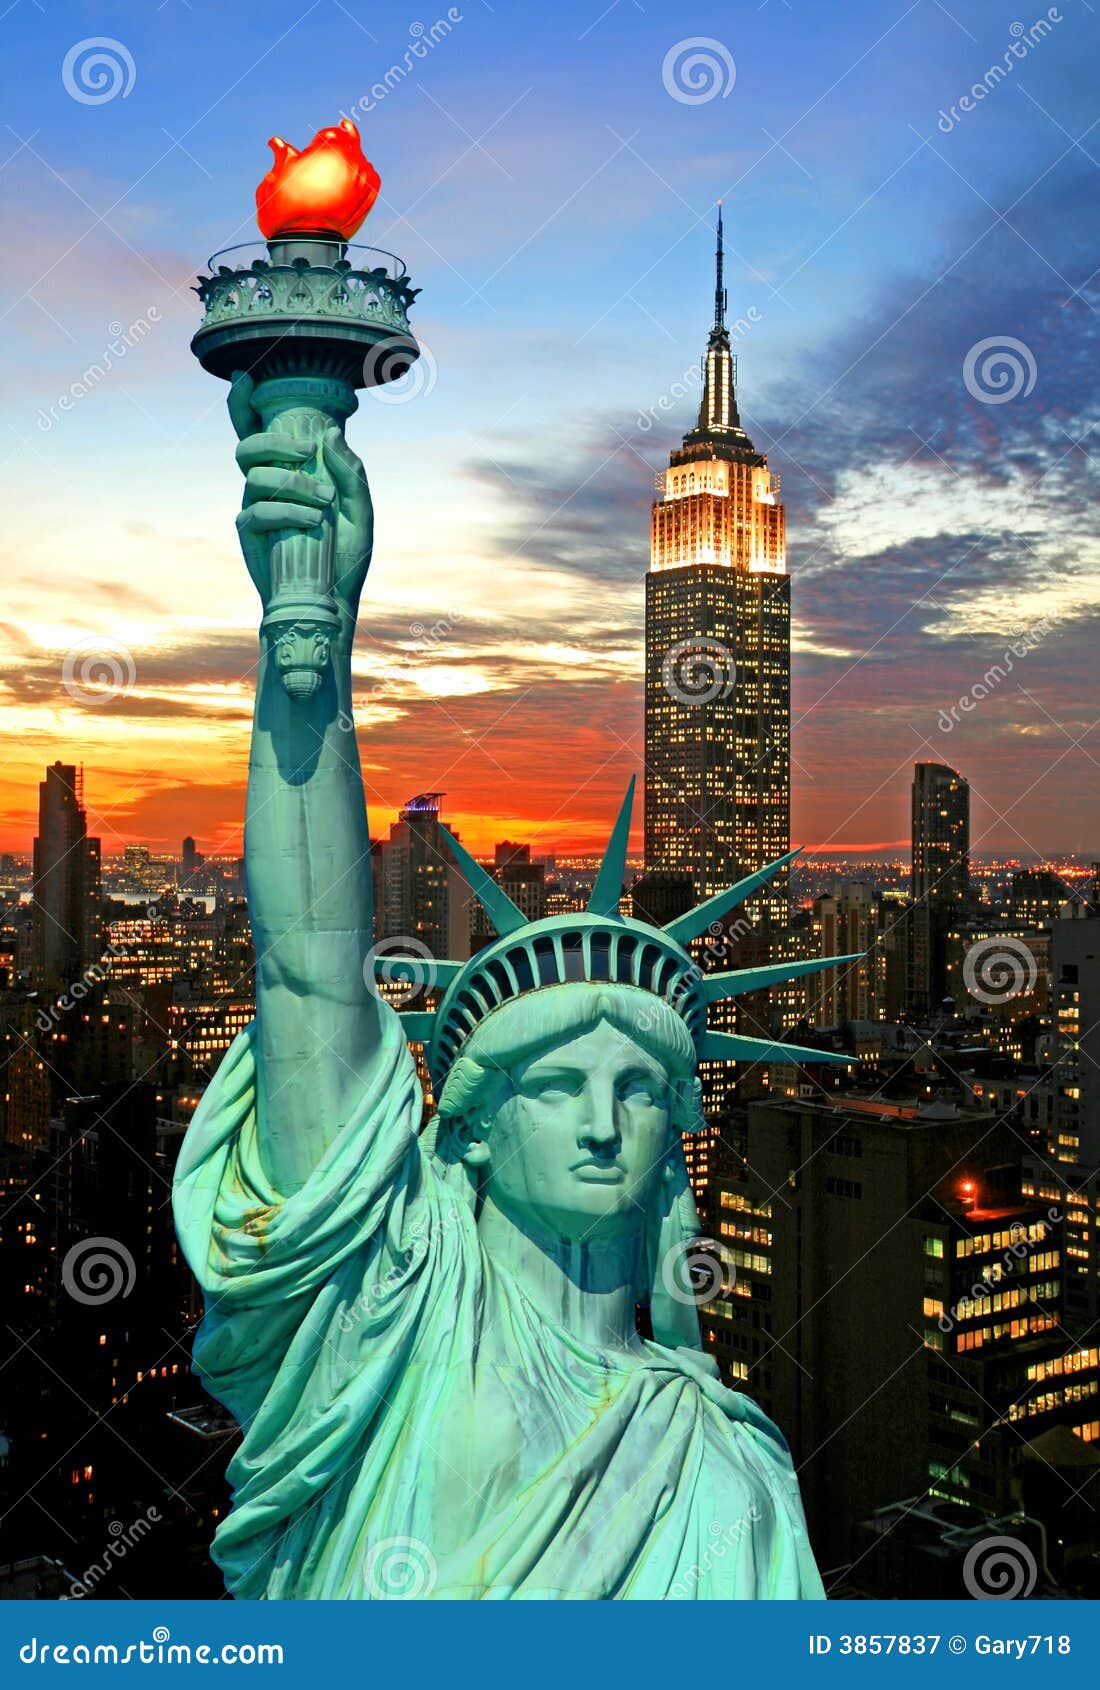 The Statue Of Liberty And New York City Skyline Stock Image - Image of